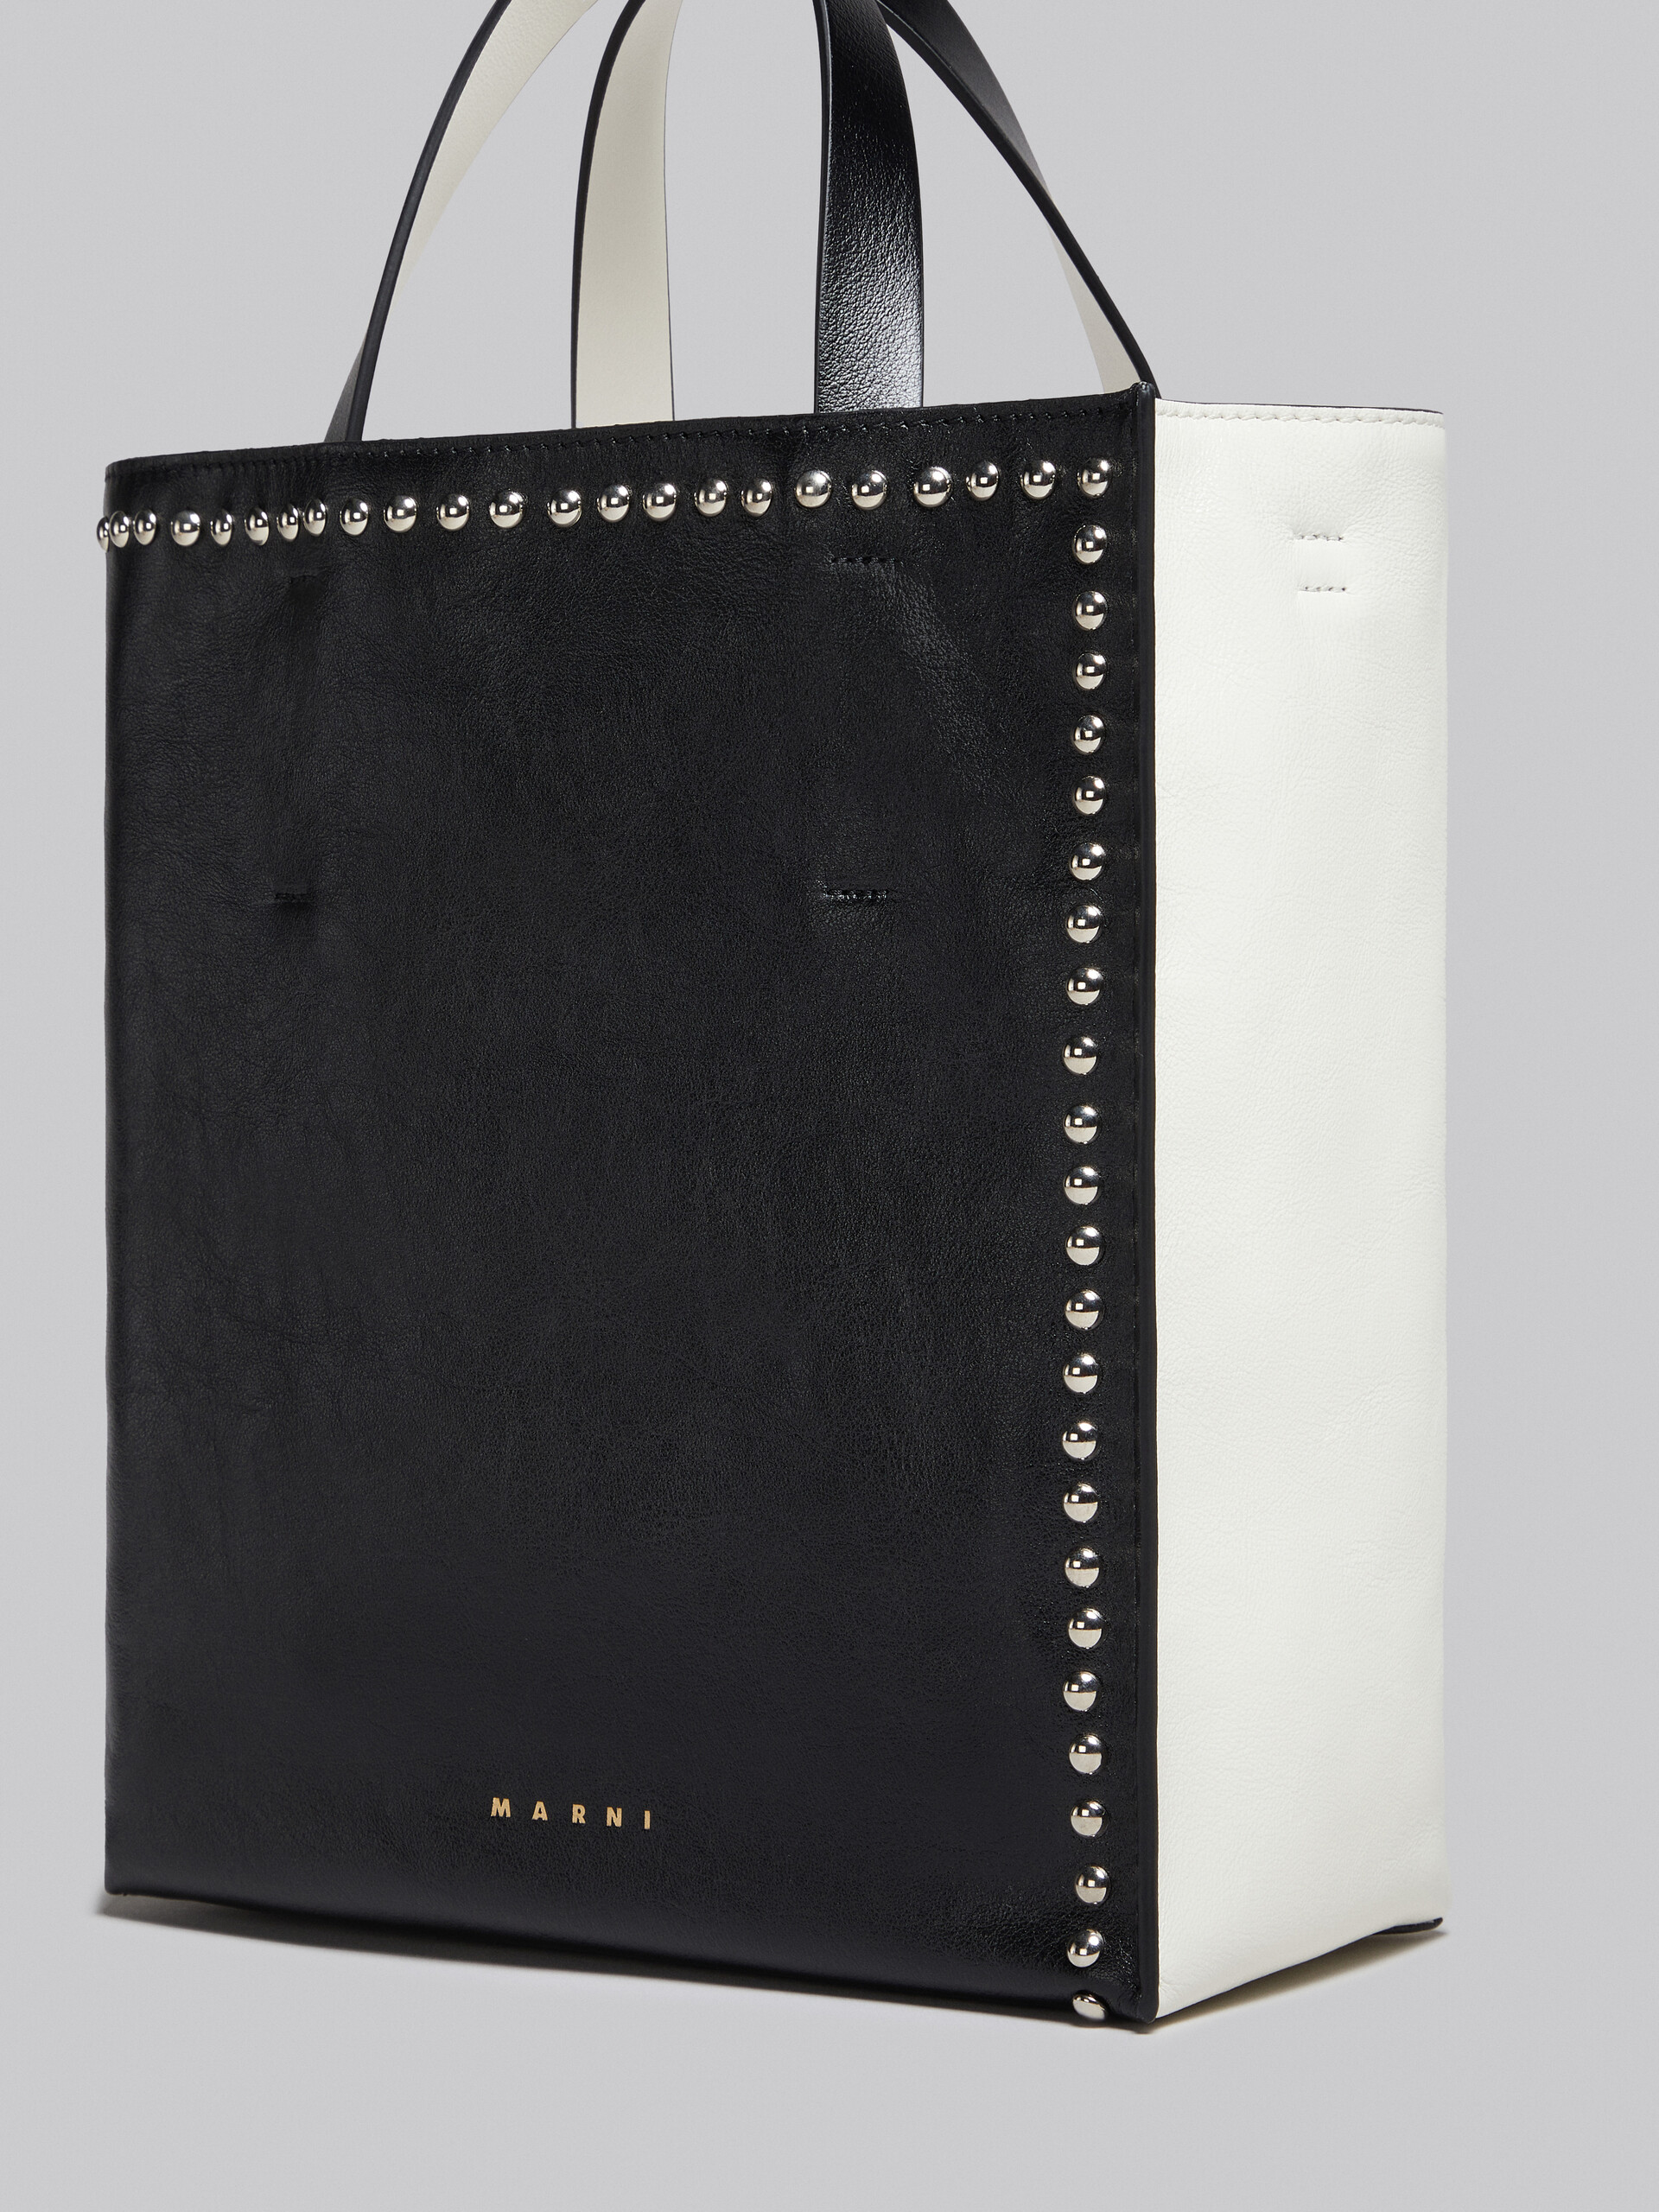 Museo Soft Small Bag in black and white leather with studs - Shopping Bags - Image 5